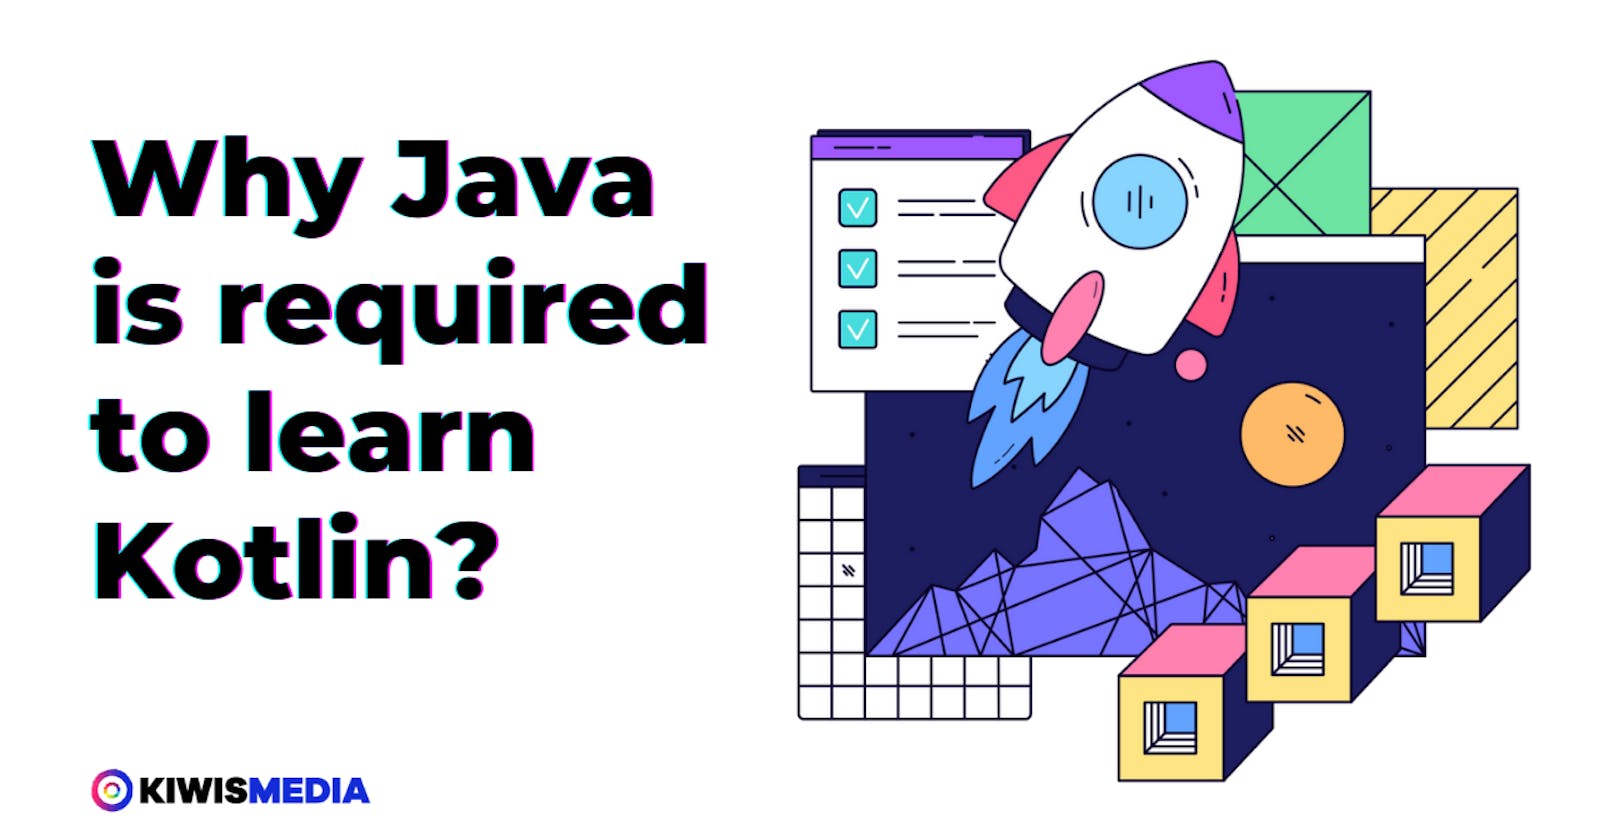 Why Java is required before learning Kotlin?